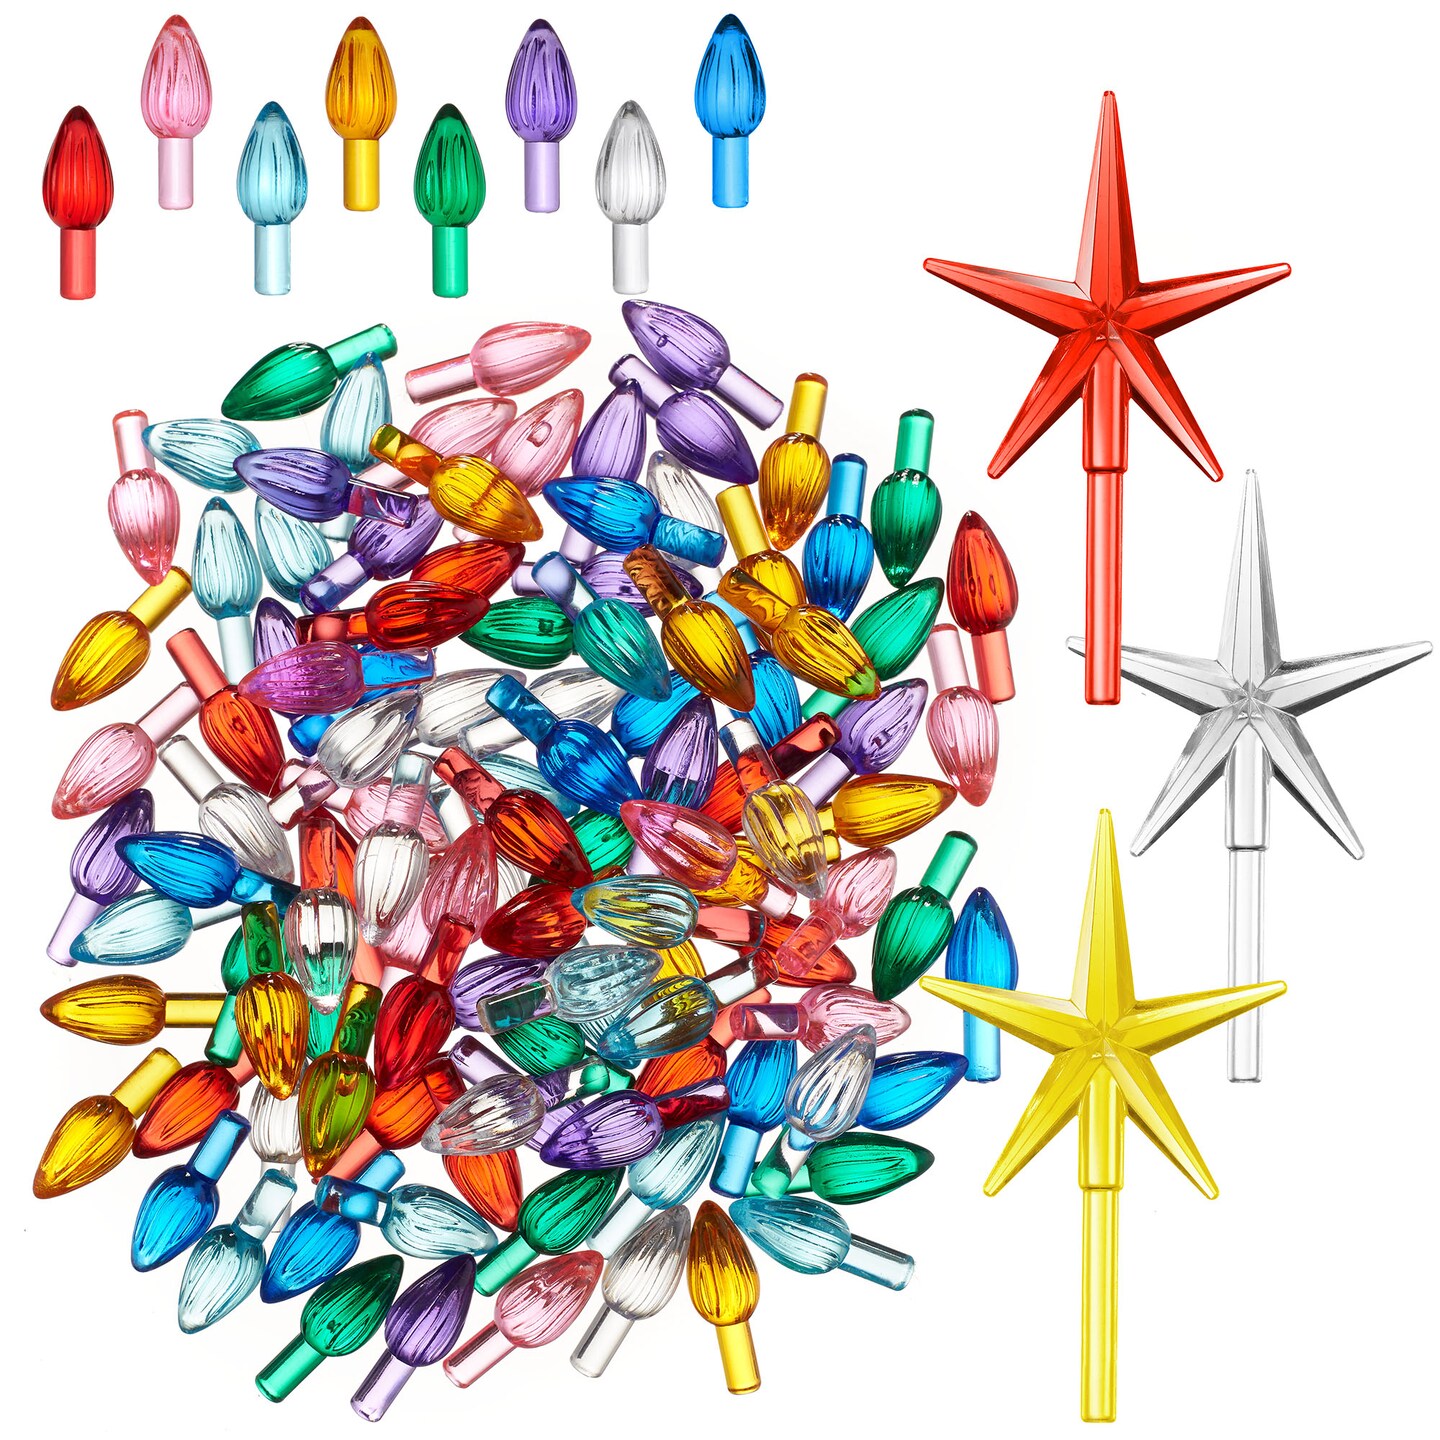 Casafield Ceramic Christmas Tree Replacement Lights - 108 Multi-color Bulbs and 3 Star Toppers